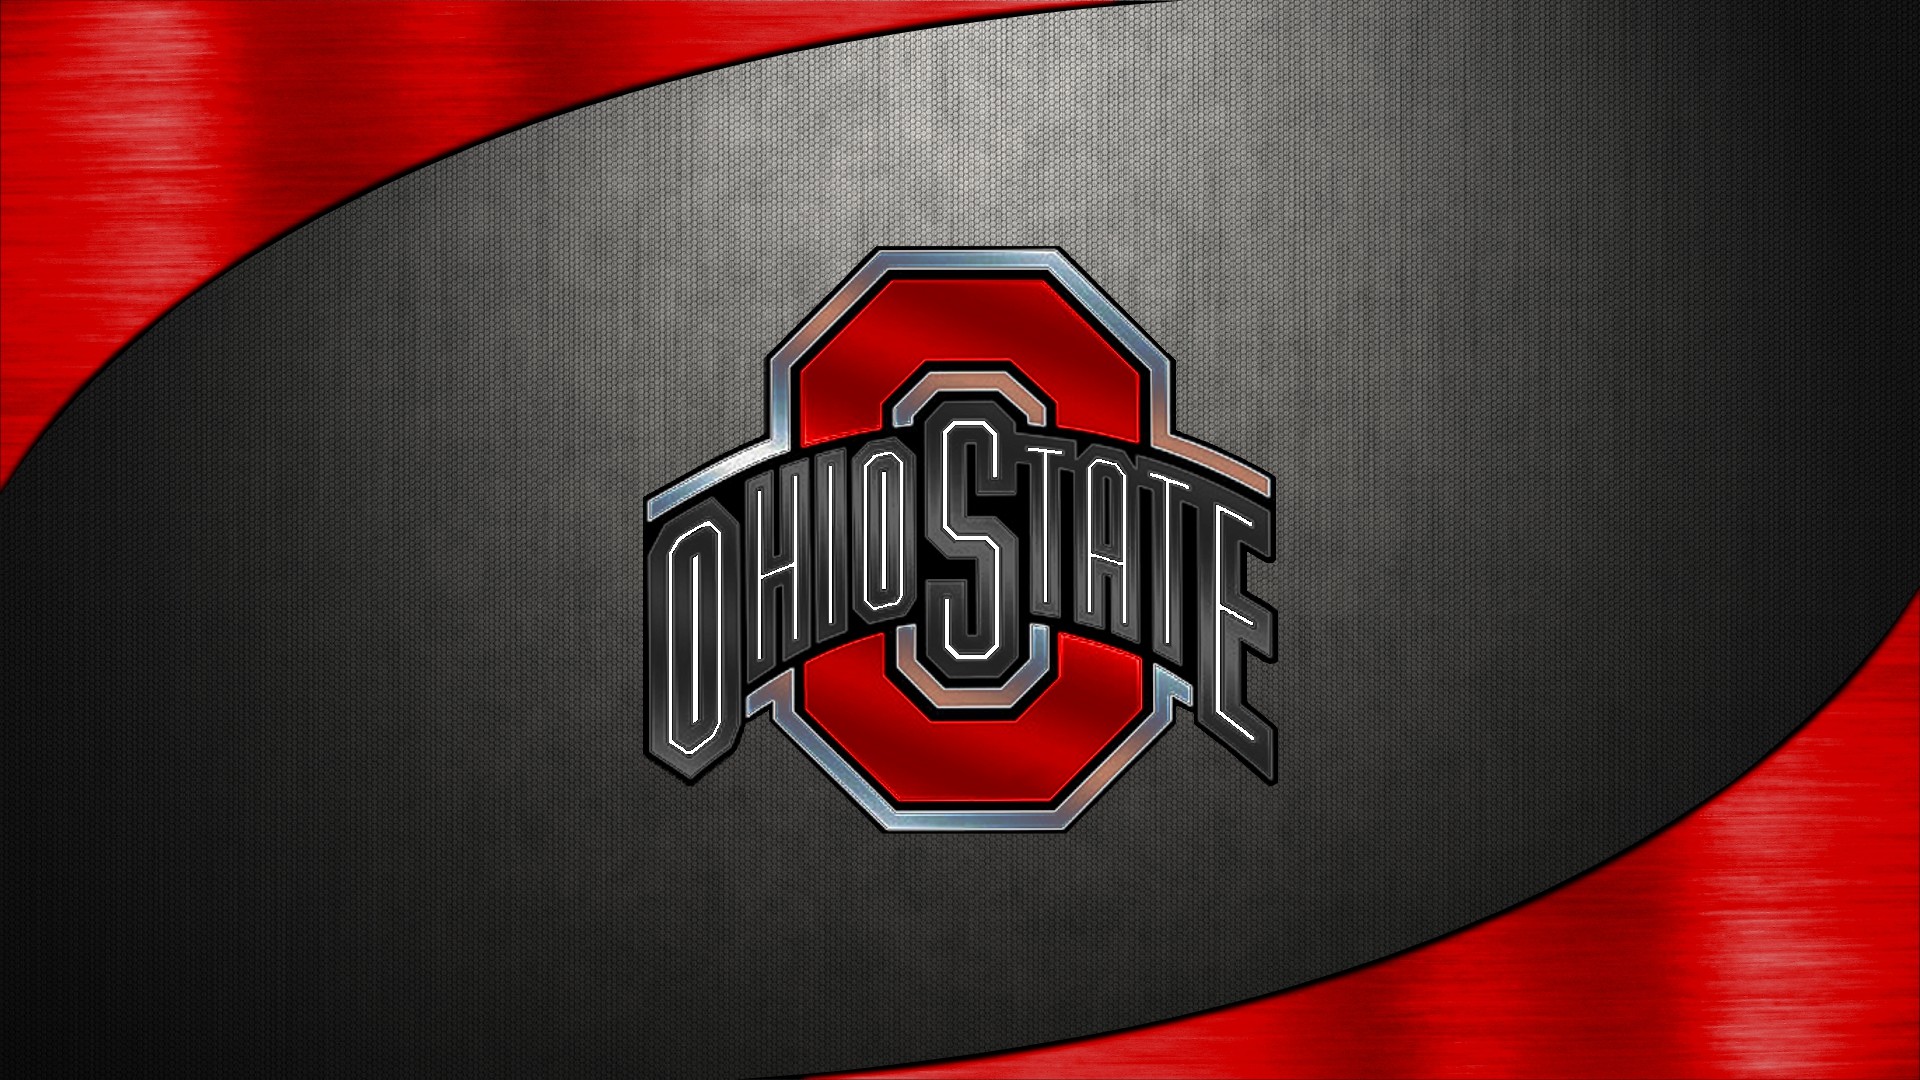 Ohio State Football Wallpaper 2018 (64+ images)